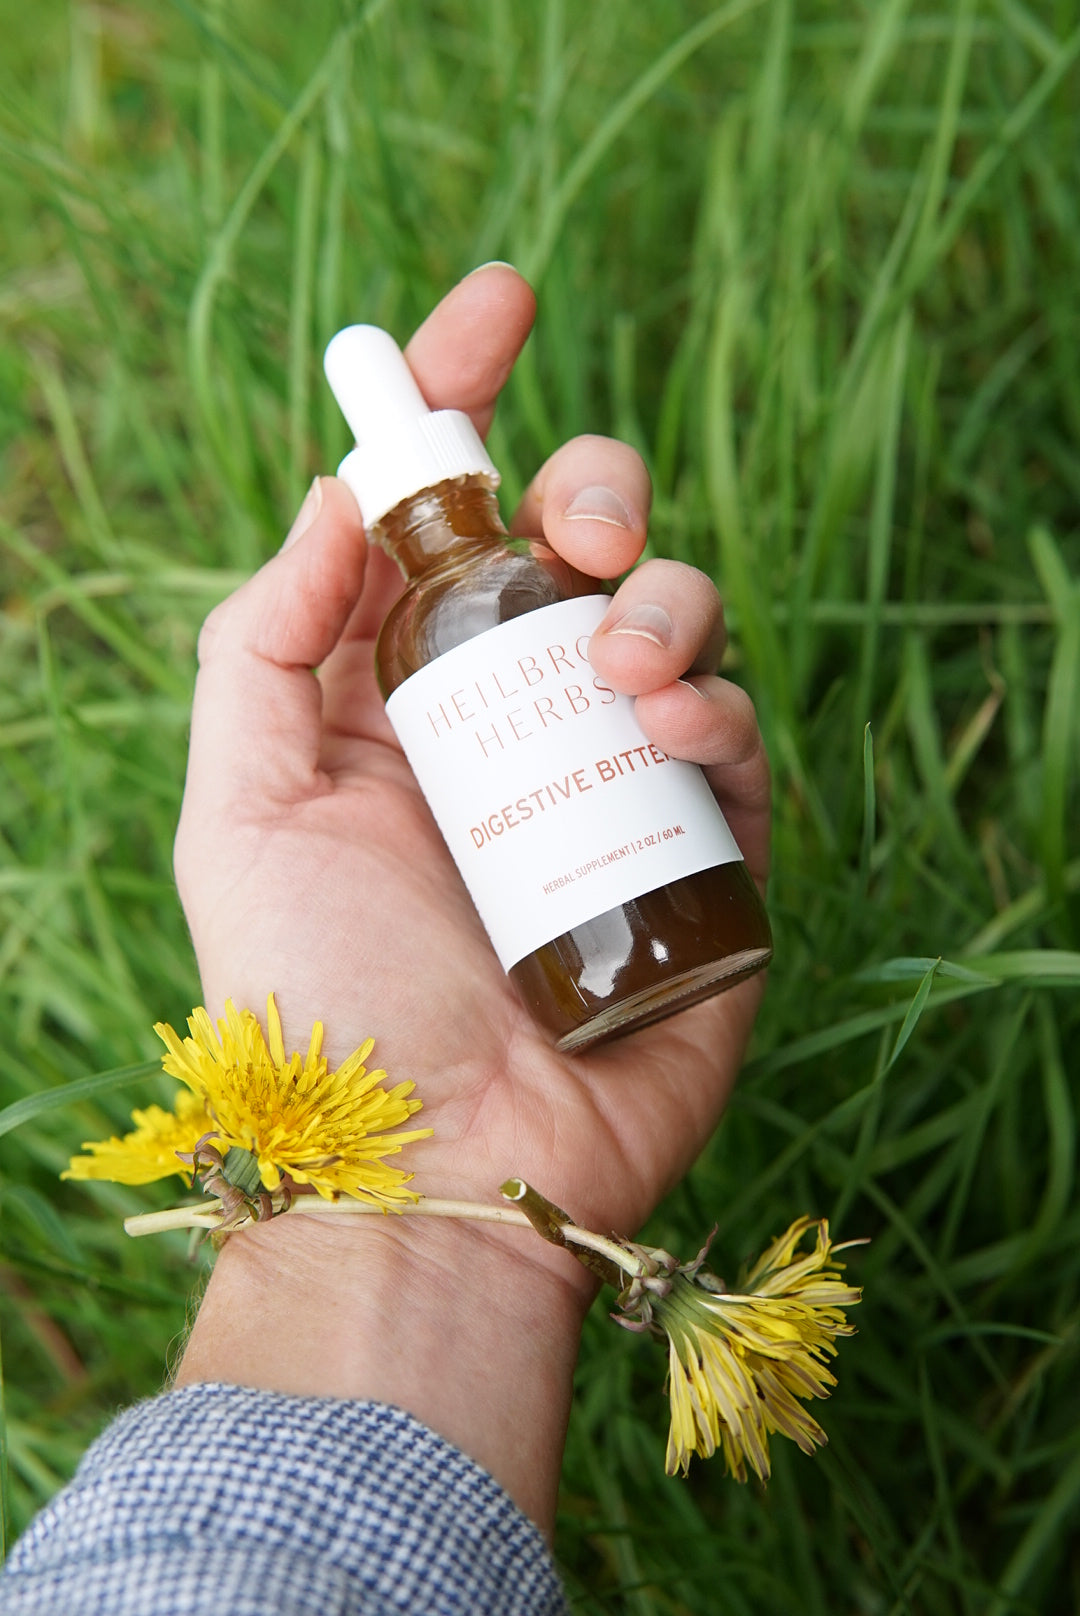 Digestive Bitters with dandelion for digestion and liver support